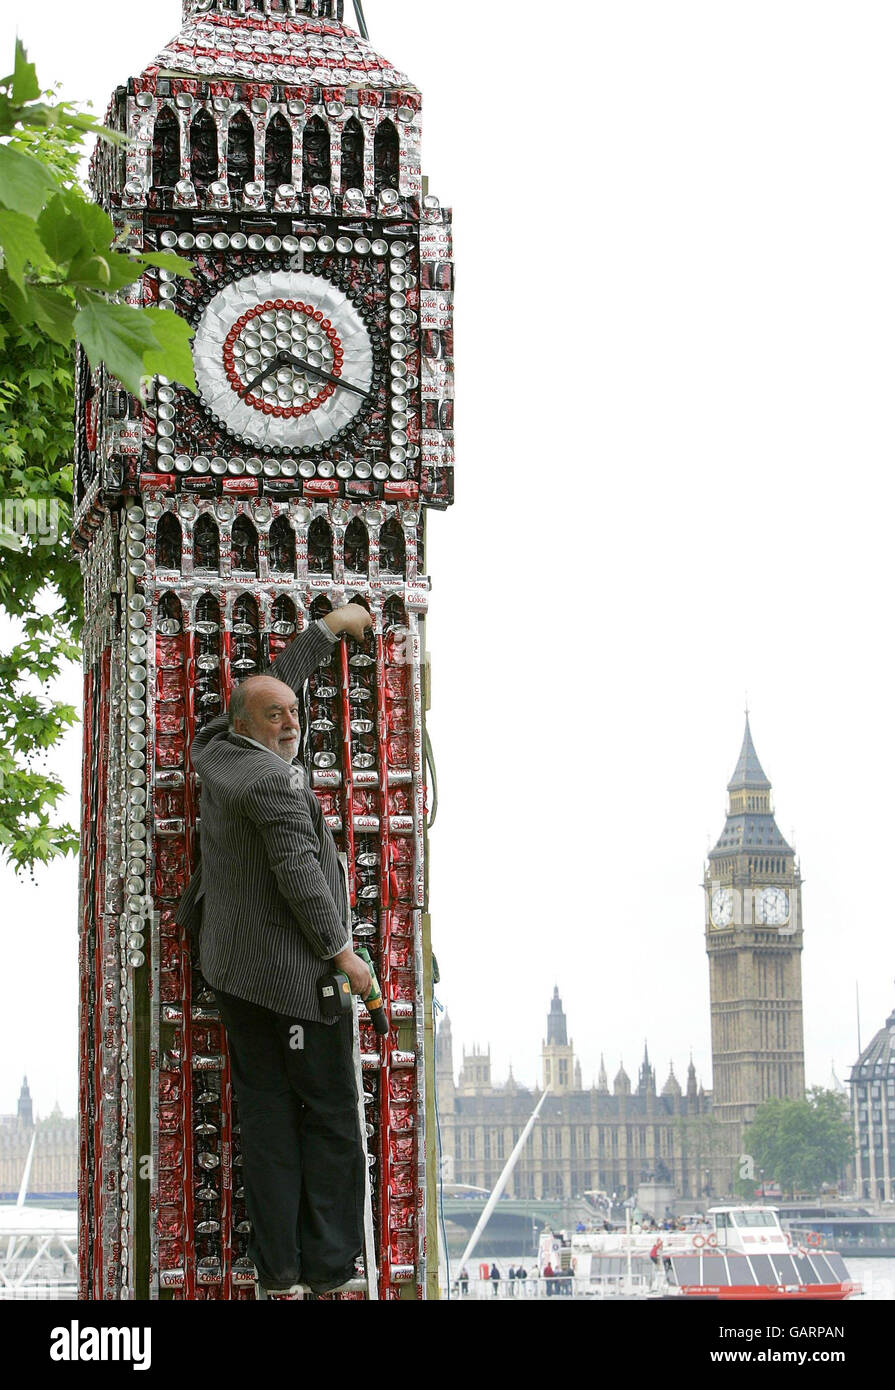 koud Vooruitgaan longontsteking A 6 meter high sculpture of Big Ben made from Coca-Cola cans by artist,  Robert Bradford (shown in picture), on London's South Bank Stock Photo -  Alamy